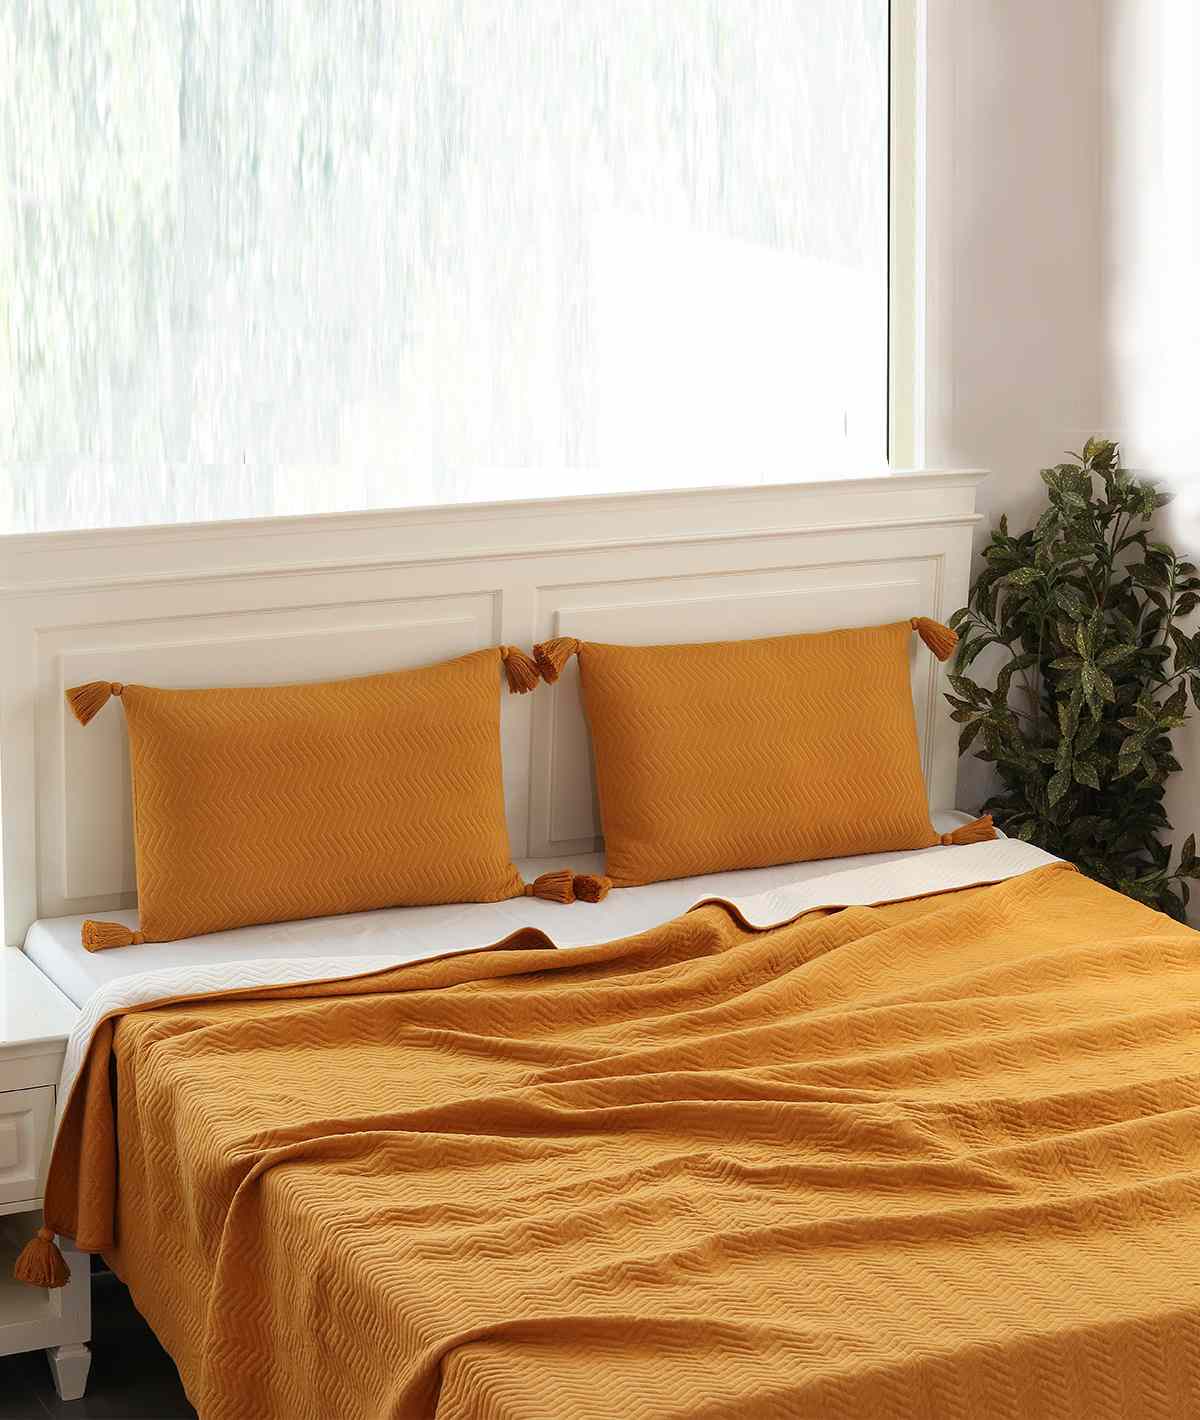 King Size Bed Cover